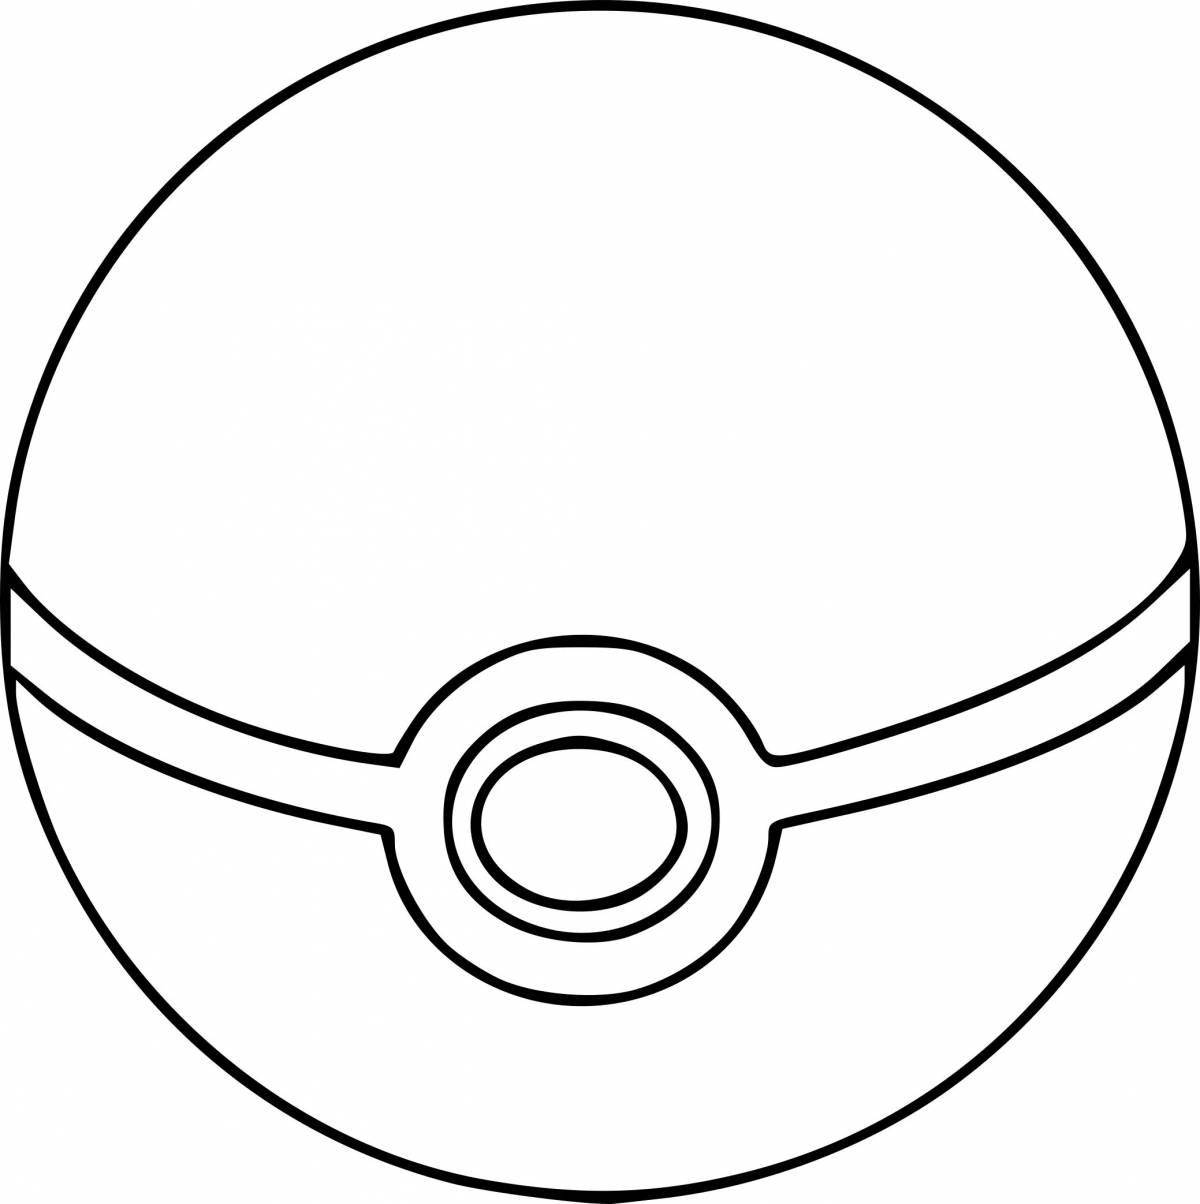 Awesome pikachu and pokeball coloring page